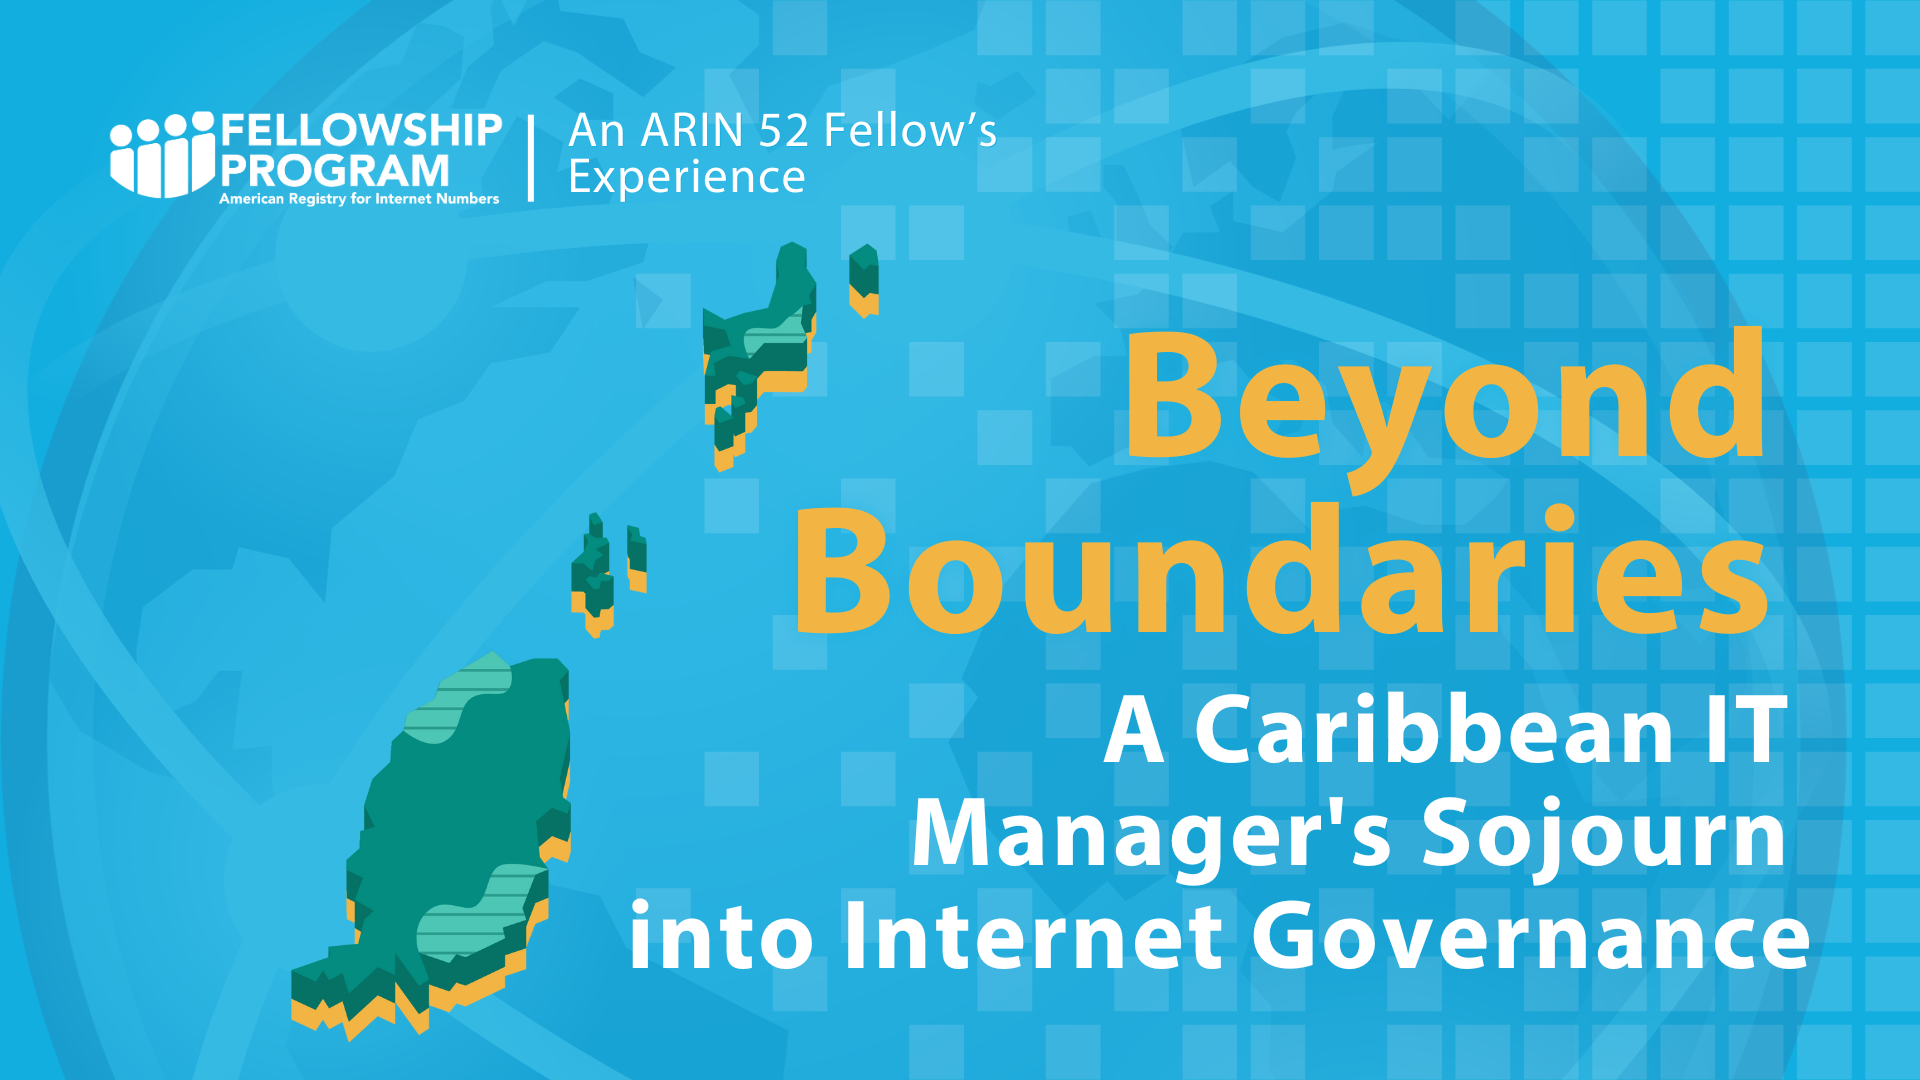 Beyond Boundaries: A Caribbean IT Manager's Sojourn into Internet Governance